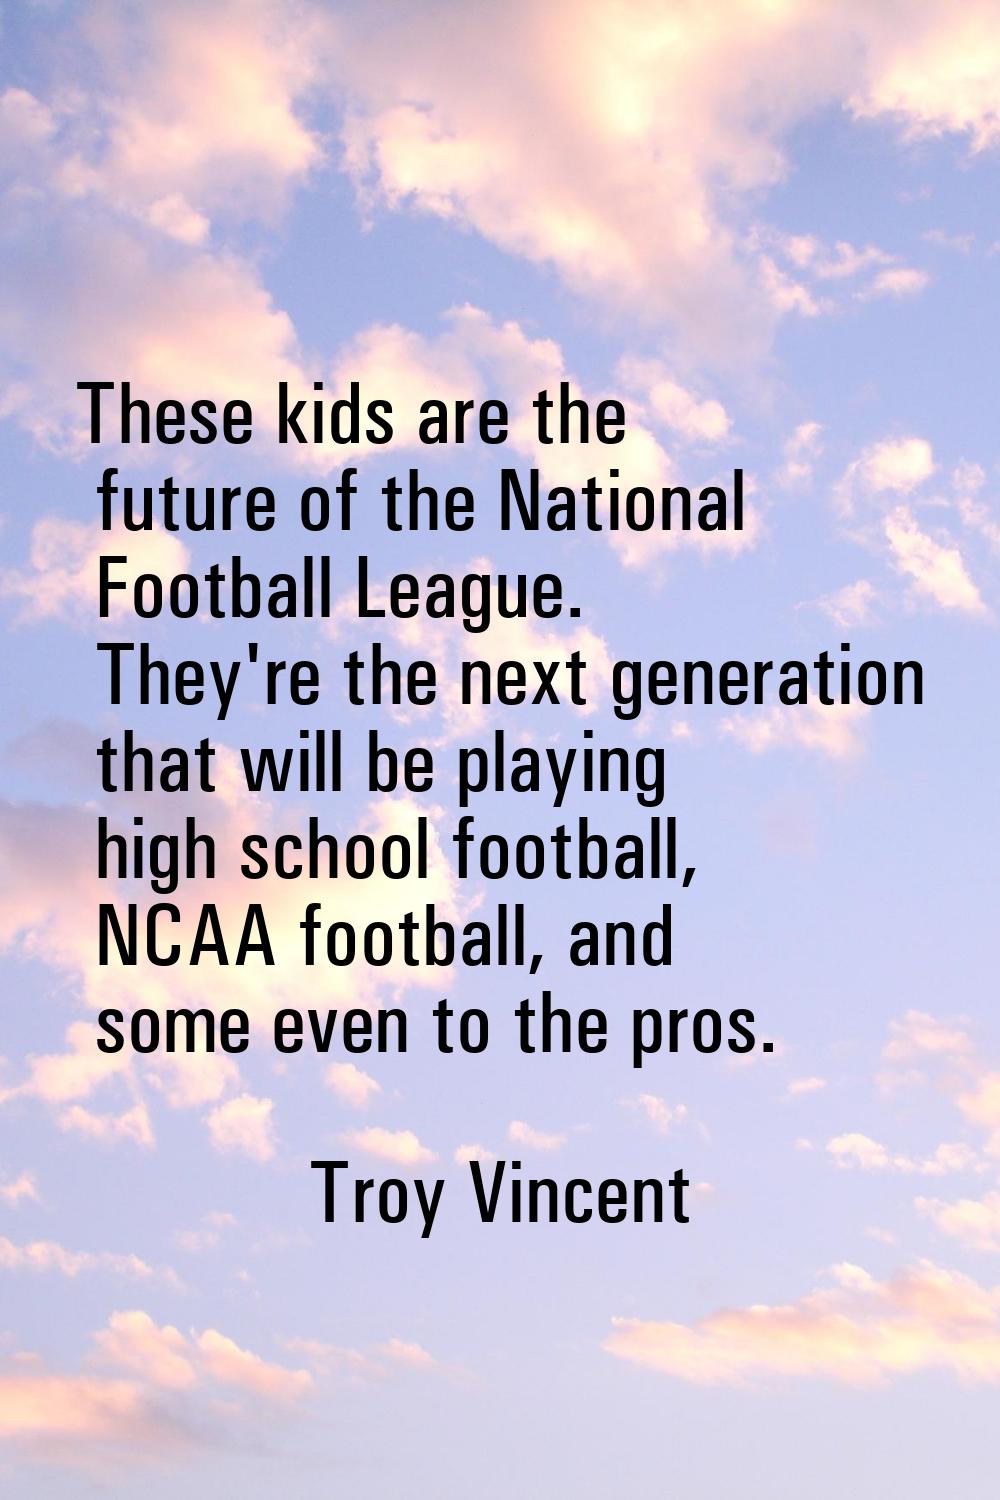 These kids are the future of the National Football League. They're the next generation that will be